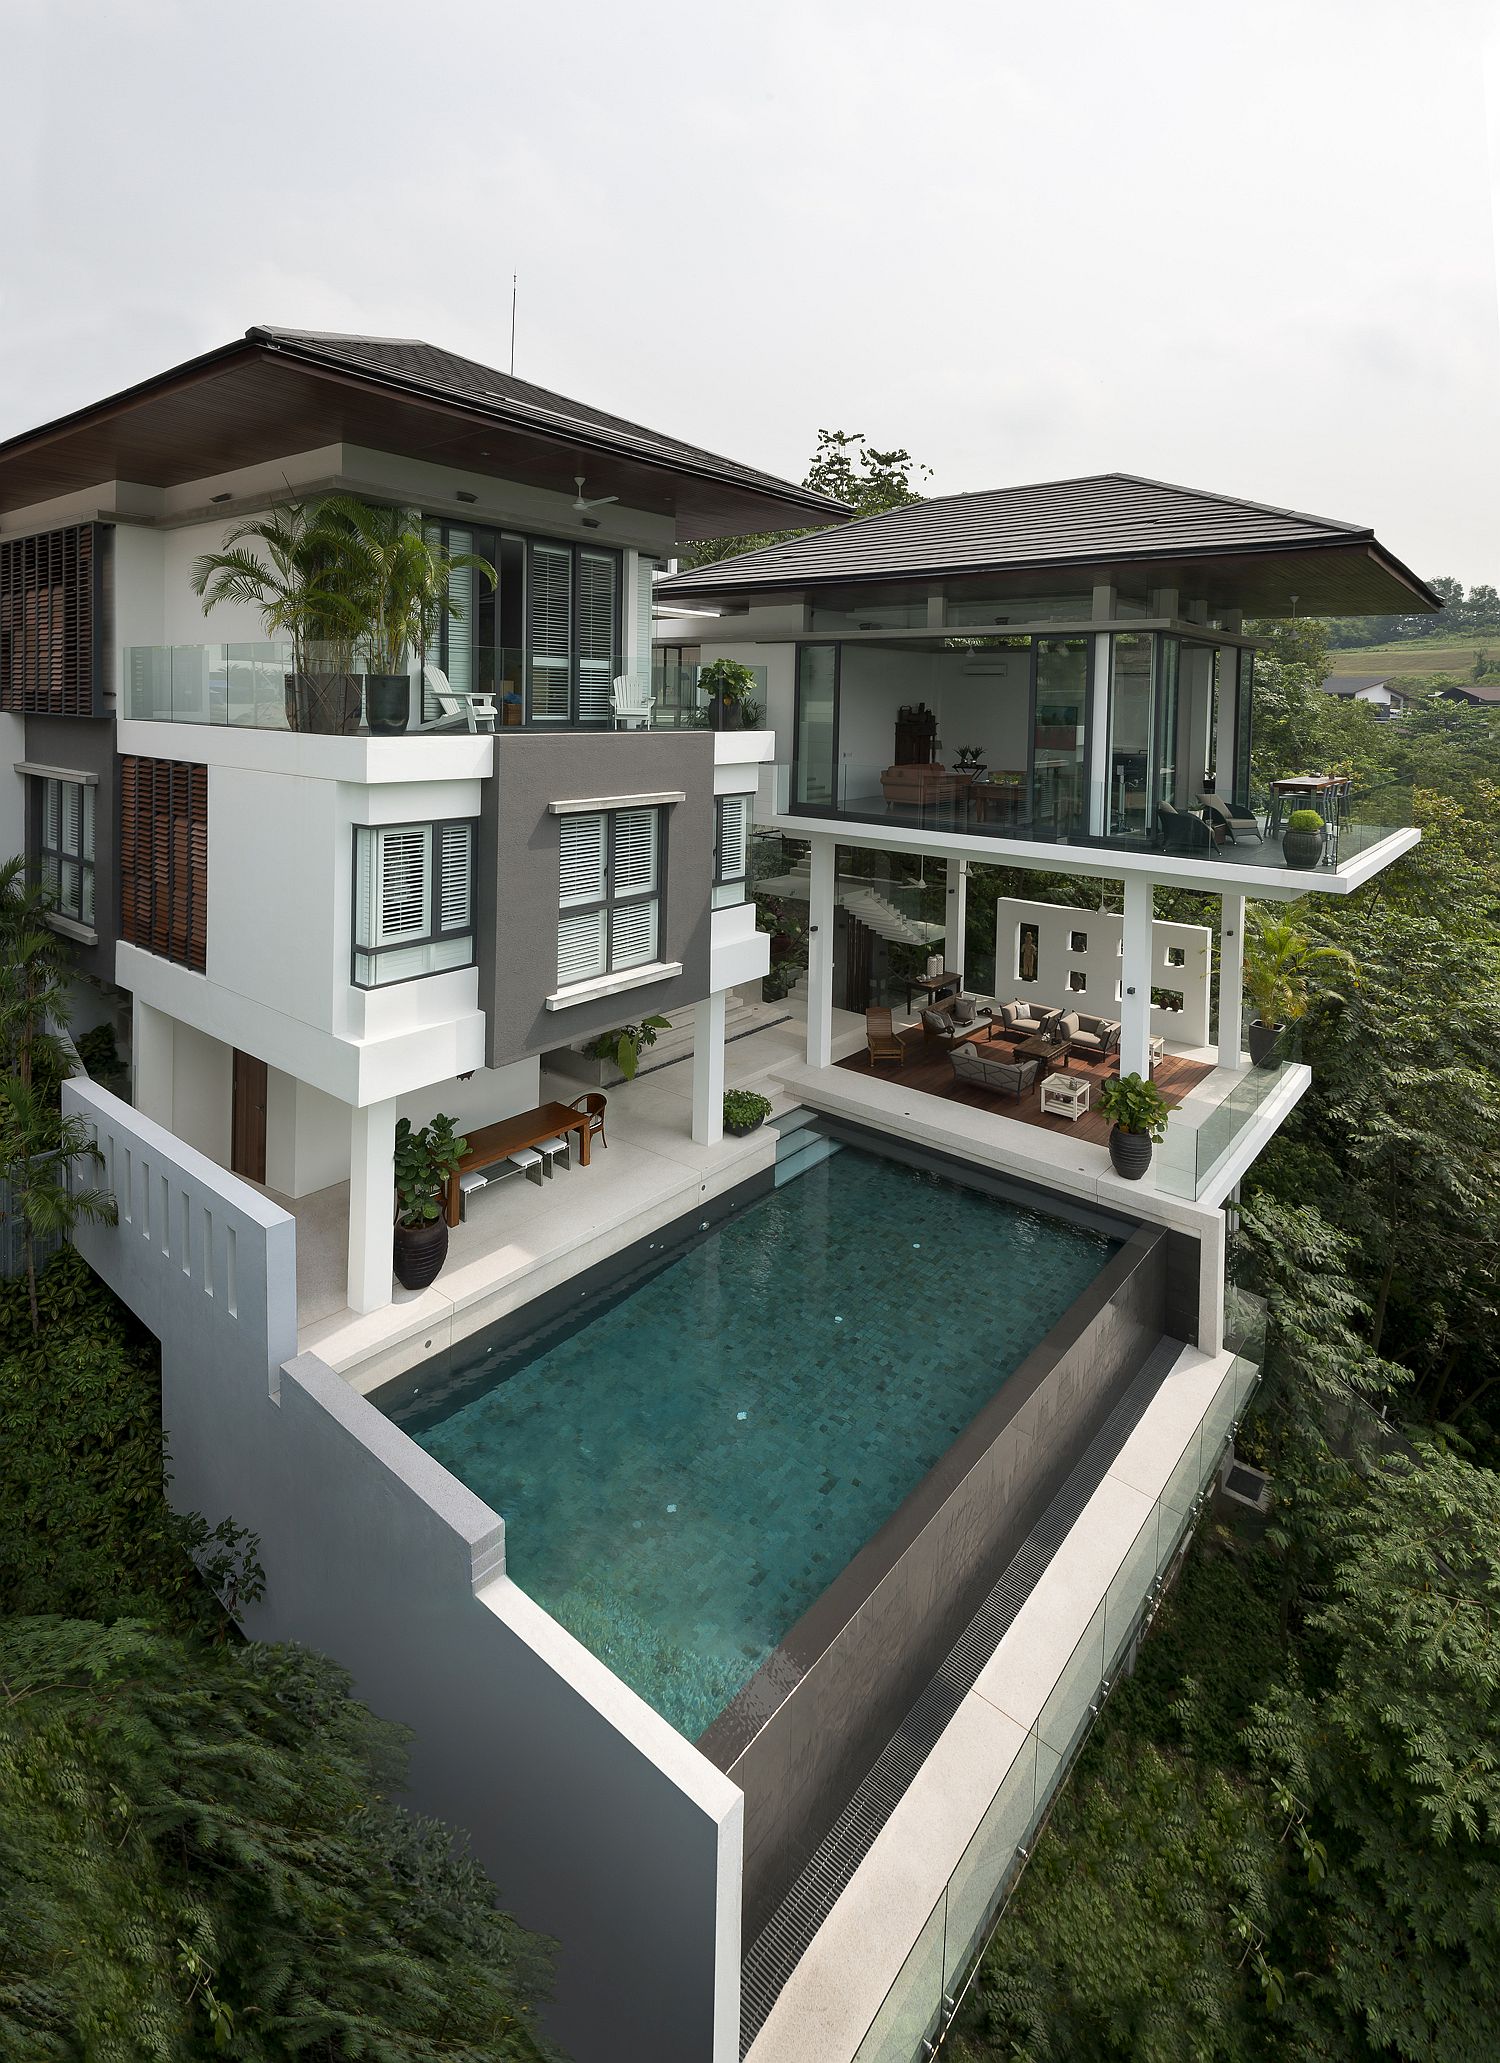 Stunning-home-with-a-floating-pool-and-multiple-decks-that-offer-amazing-forest-views